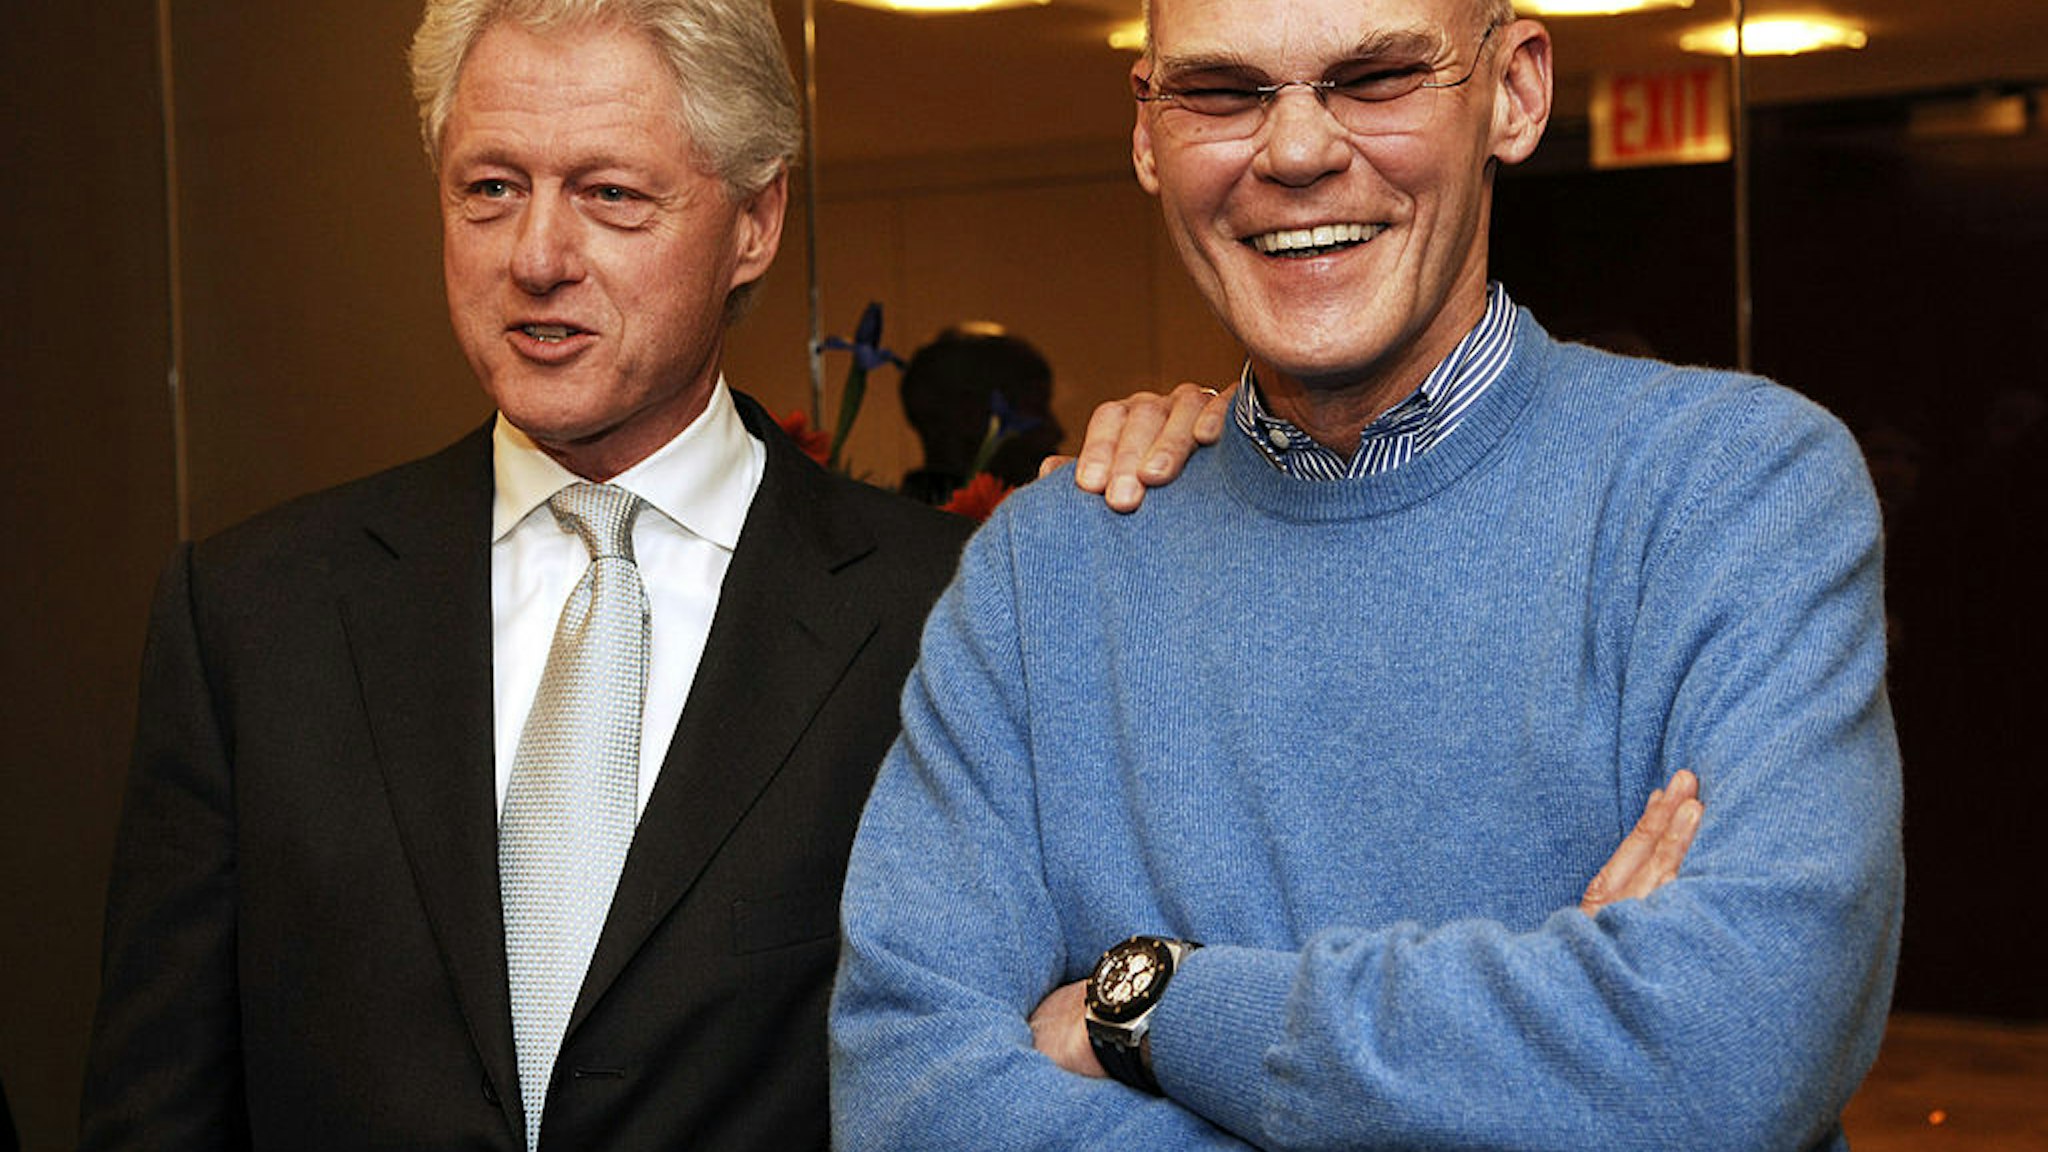 Former President Bill Clinton and James Carville during Former President Bill Clinton Hosts a Book Party for James Carville and Paul Begala's New Book "Take It Back" at 55 West 125th St. in New York, New York, United States. (Photo by